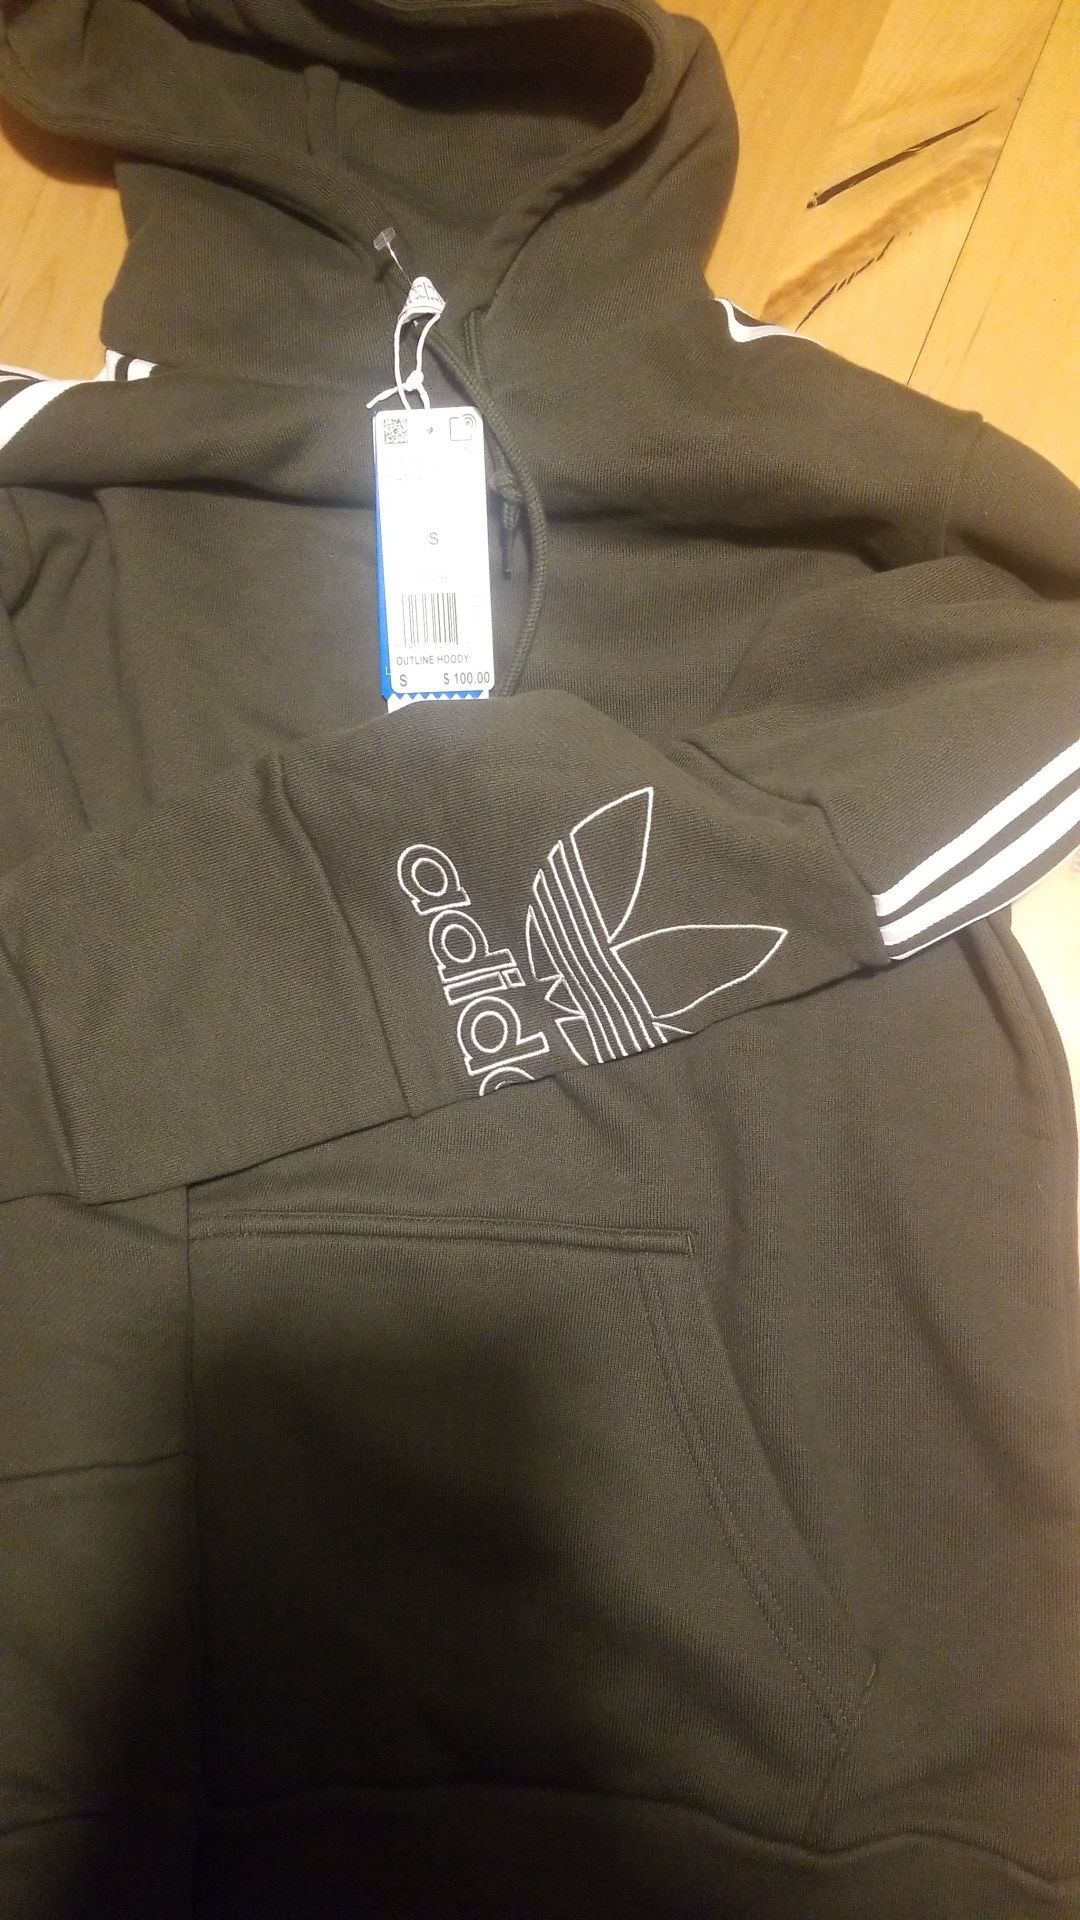 Brand new Adidas hoodie retail is $100 only asking $25!!!!